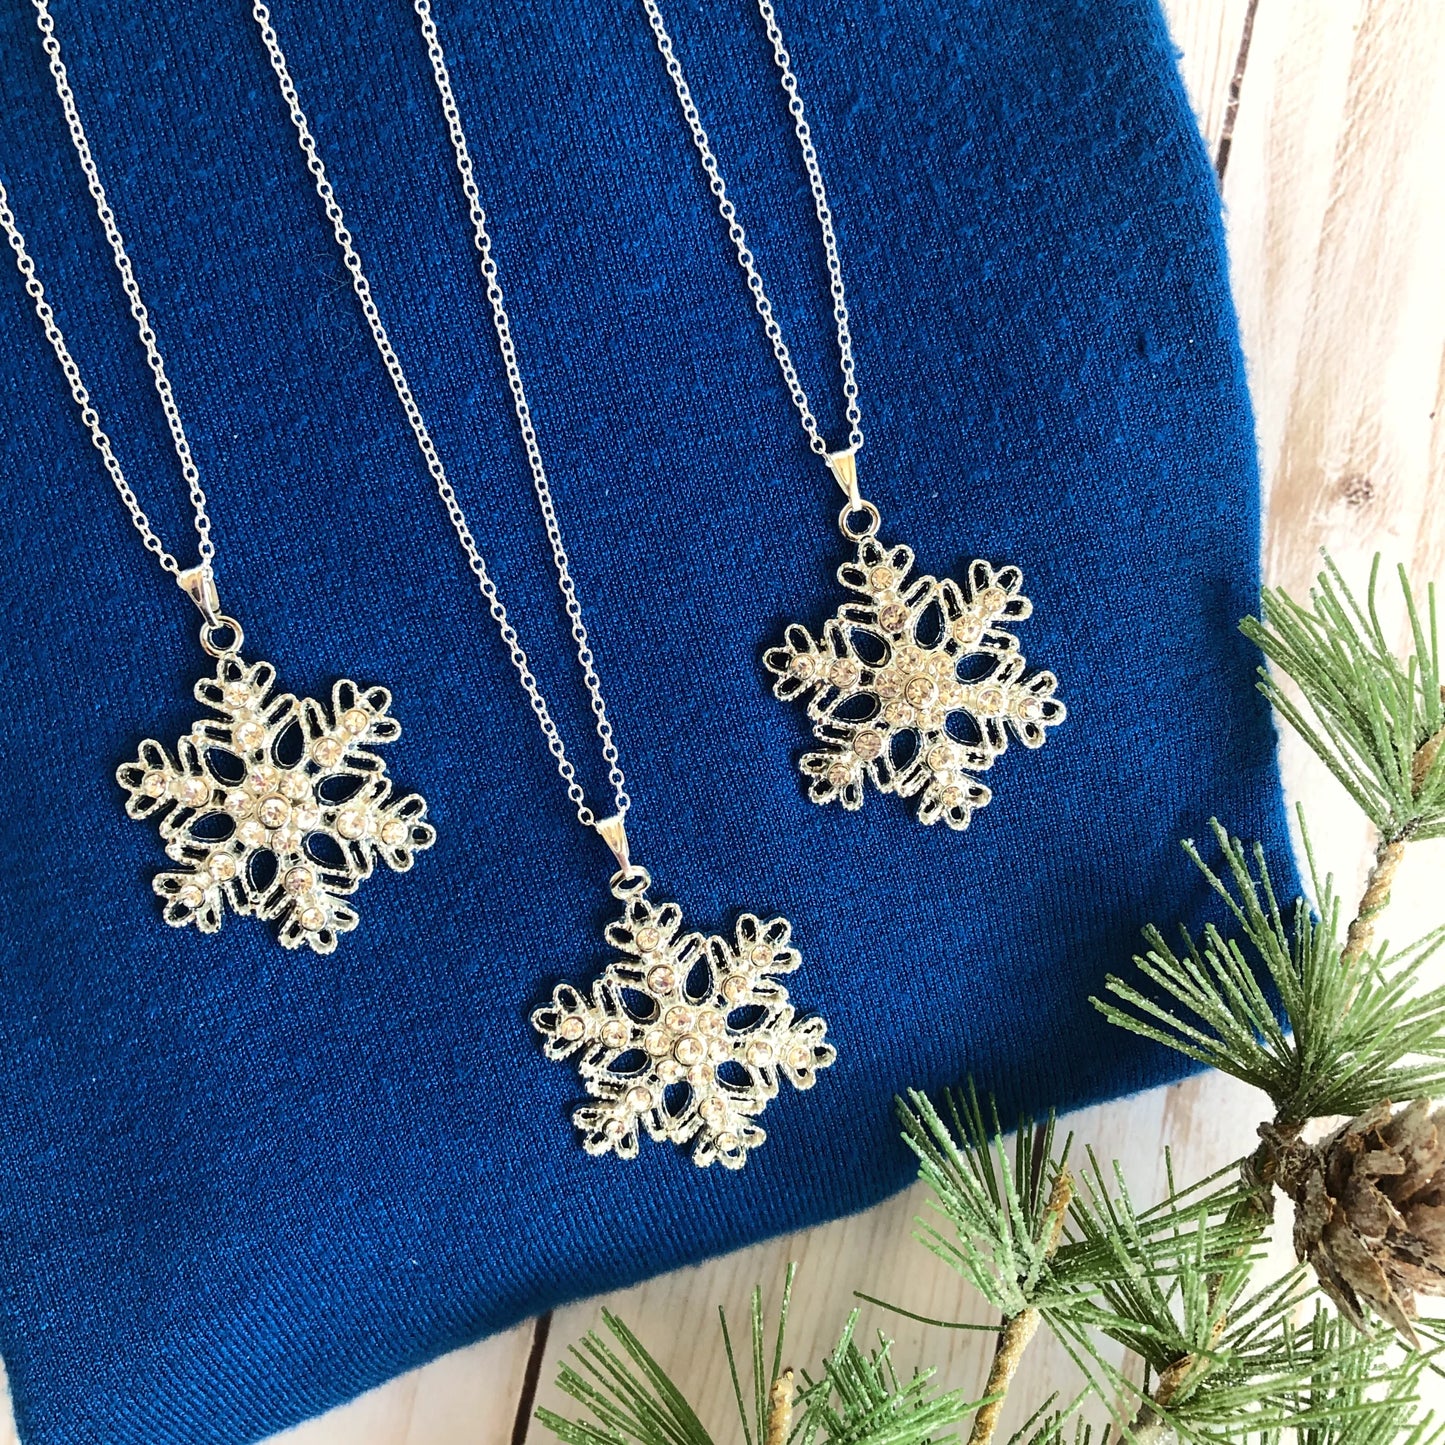 Sparkling silver snowflake pendant necklaces, on a royal blue sweater